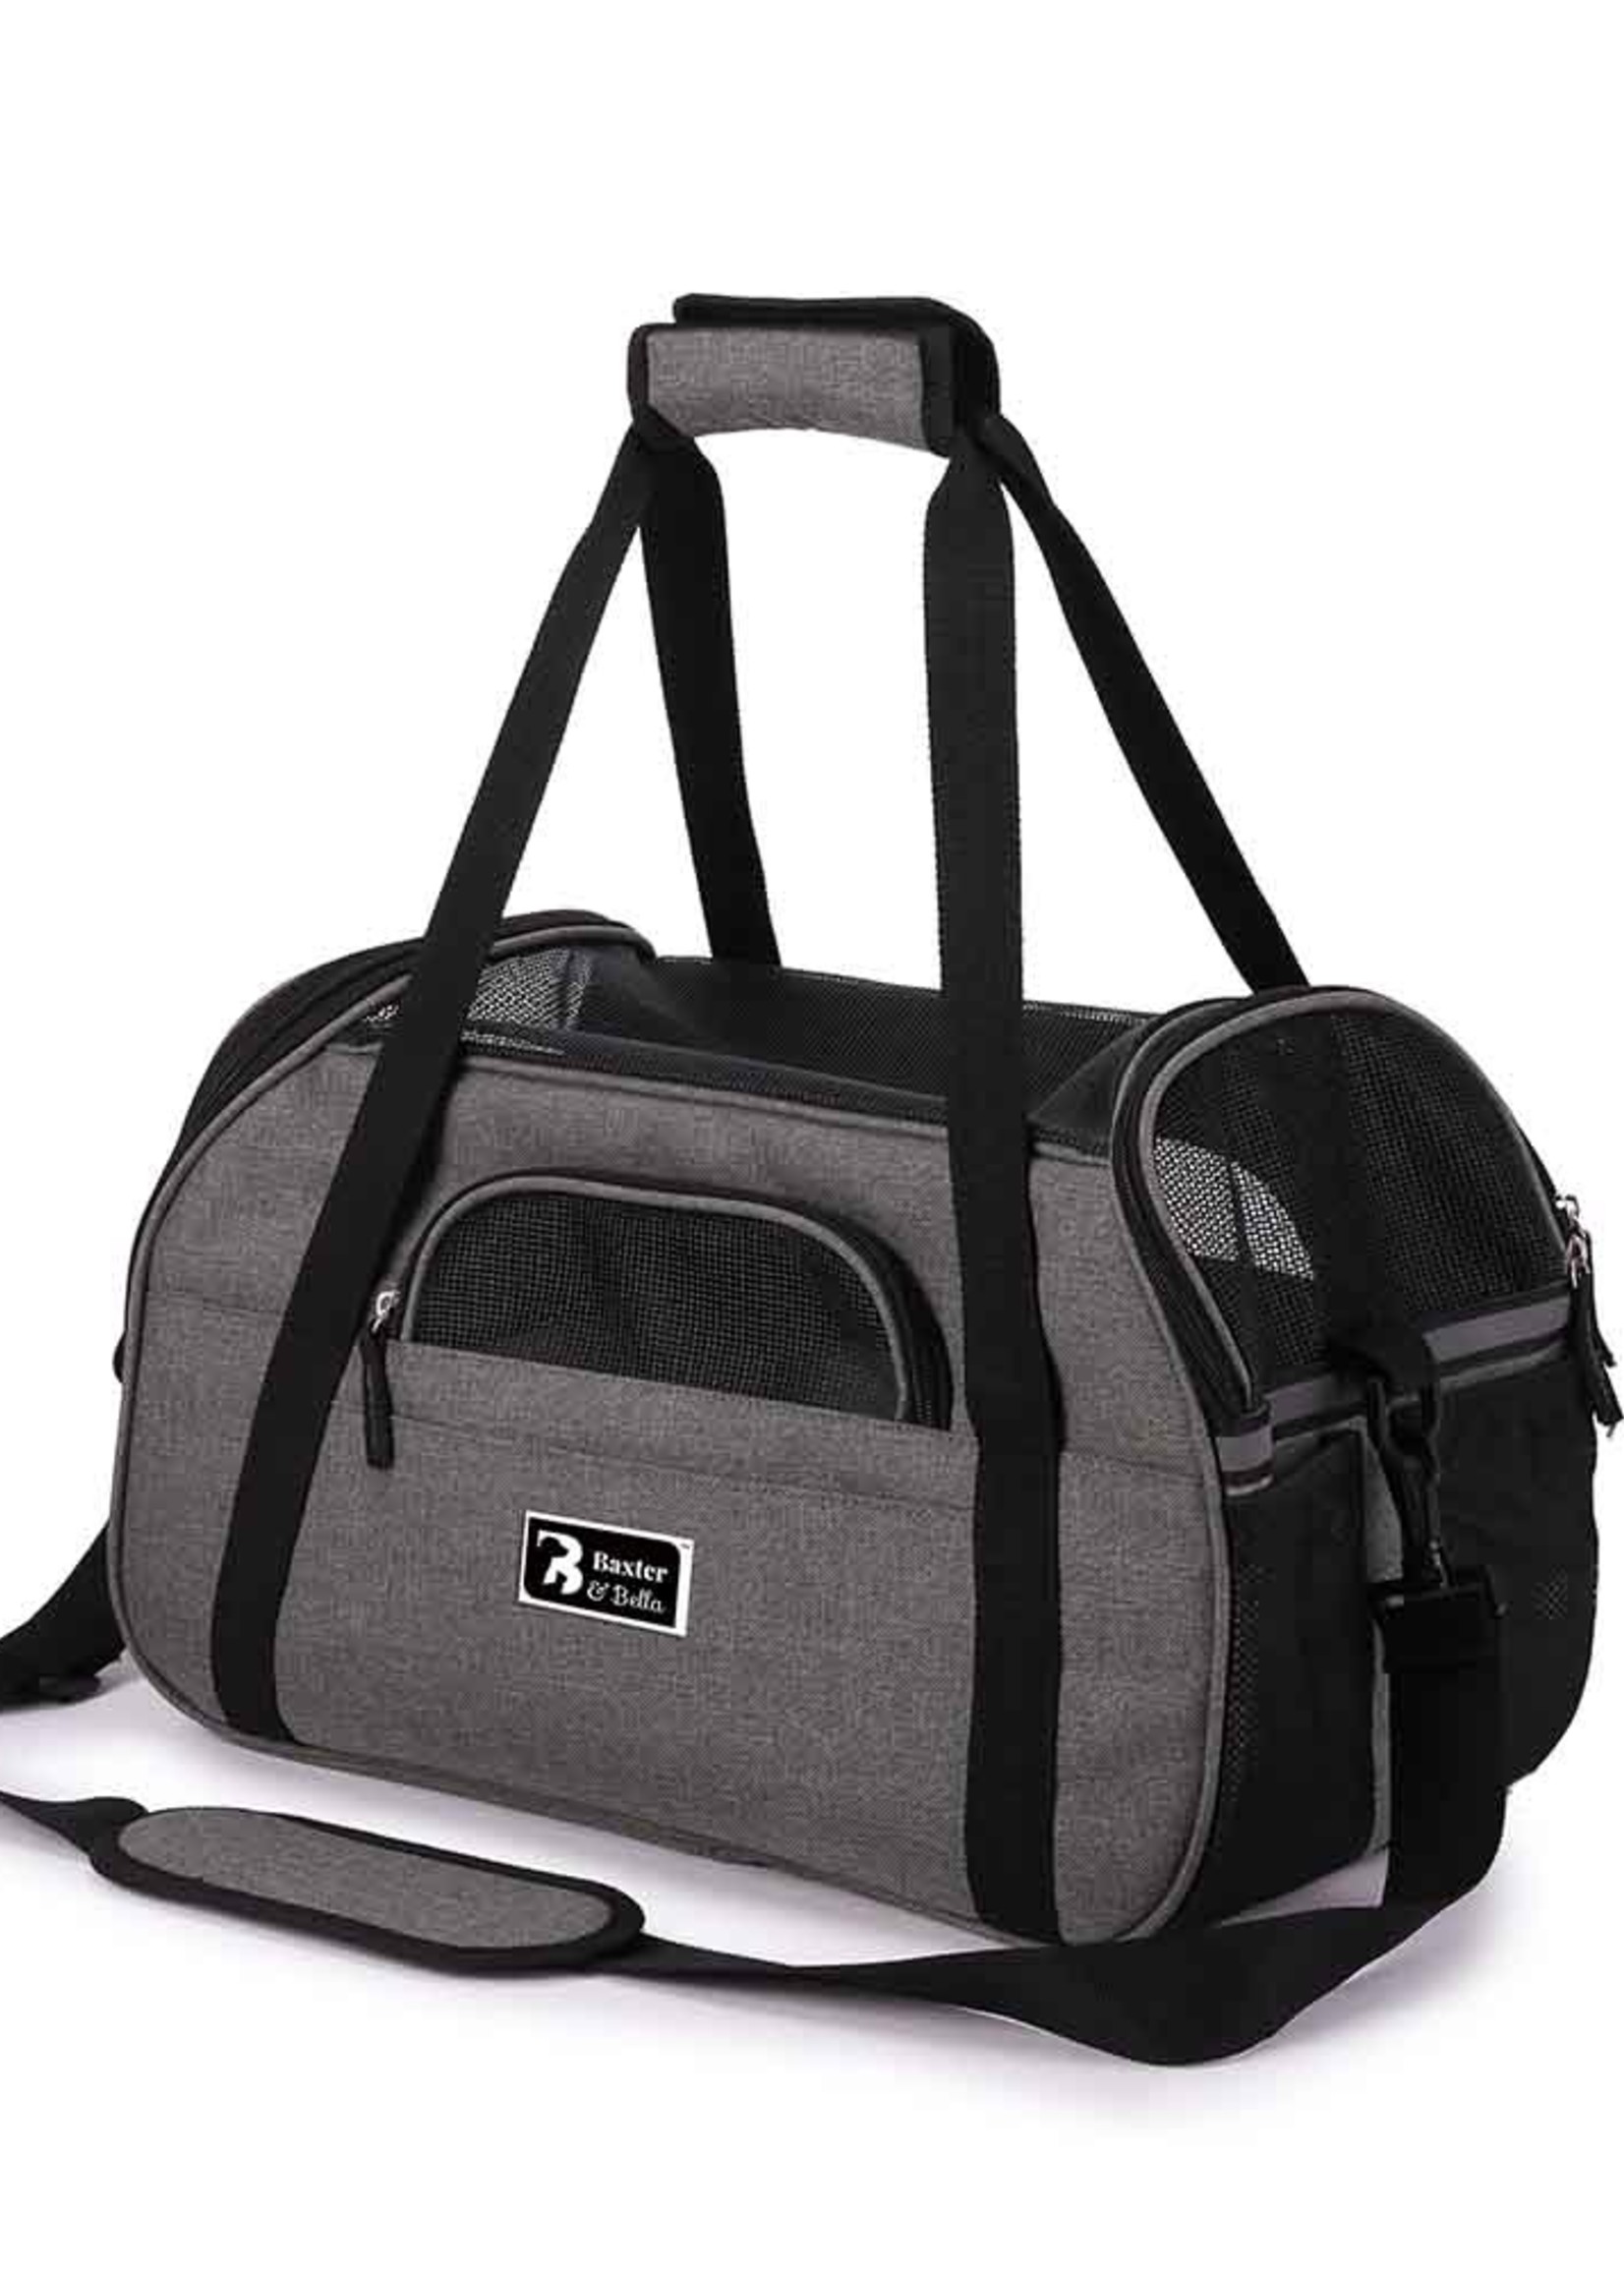 Baxter & Bella Soft Carrier Small 16x8x11.5in